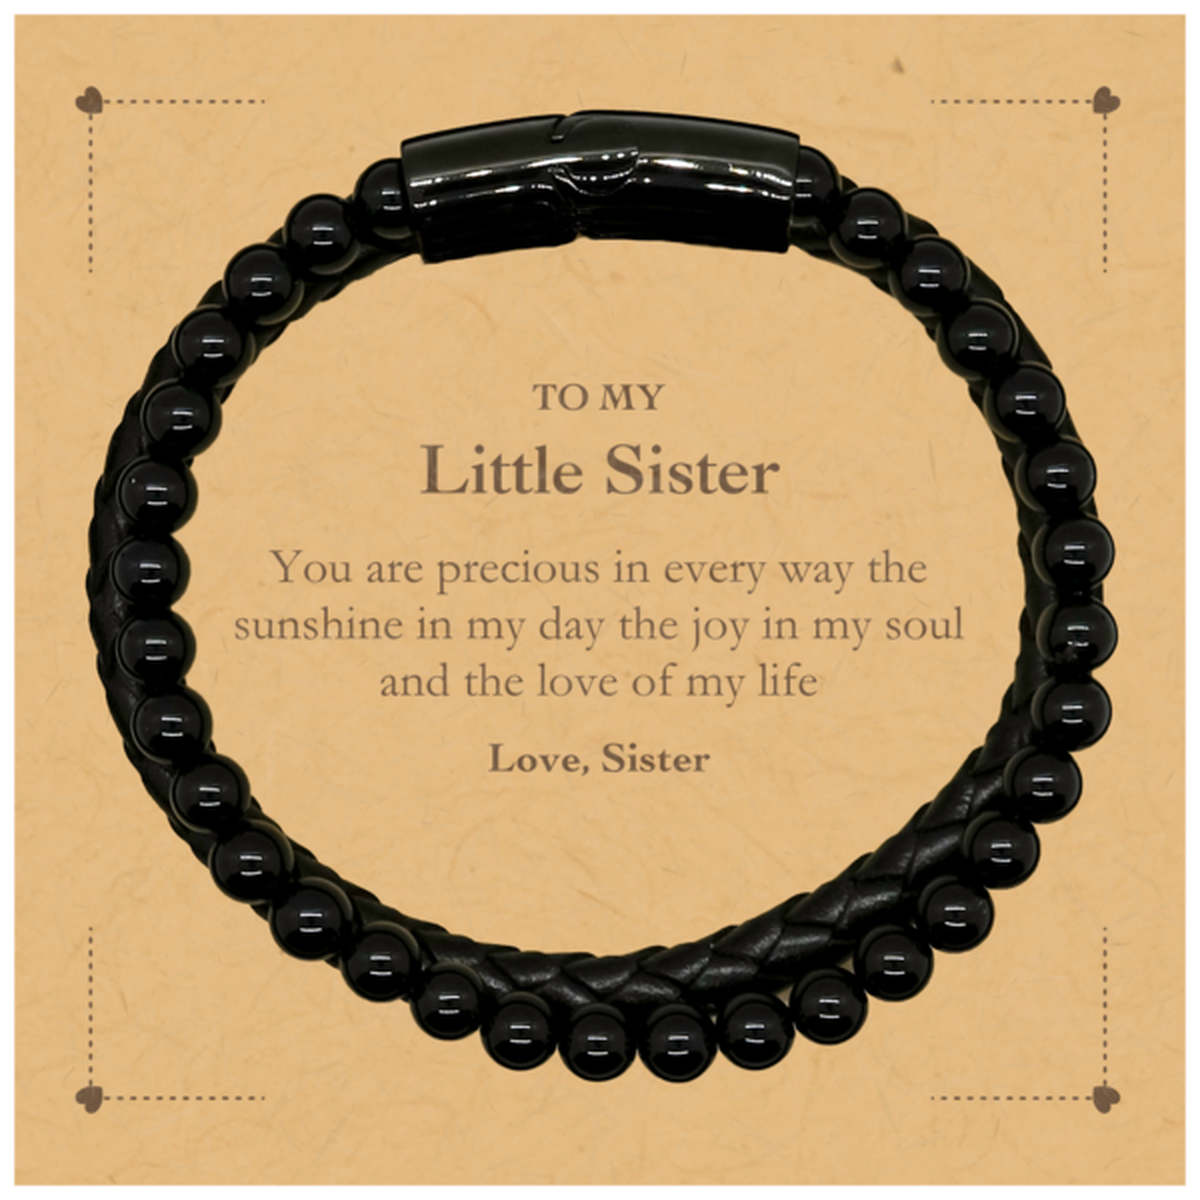 Graduation Gifts for Little Sister Stone Leather Bracelets Present from Sister, Christmas Little Sister Birthday Gifts Little Sister You are precious in every way the sunshine in my day. Love, Sister